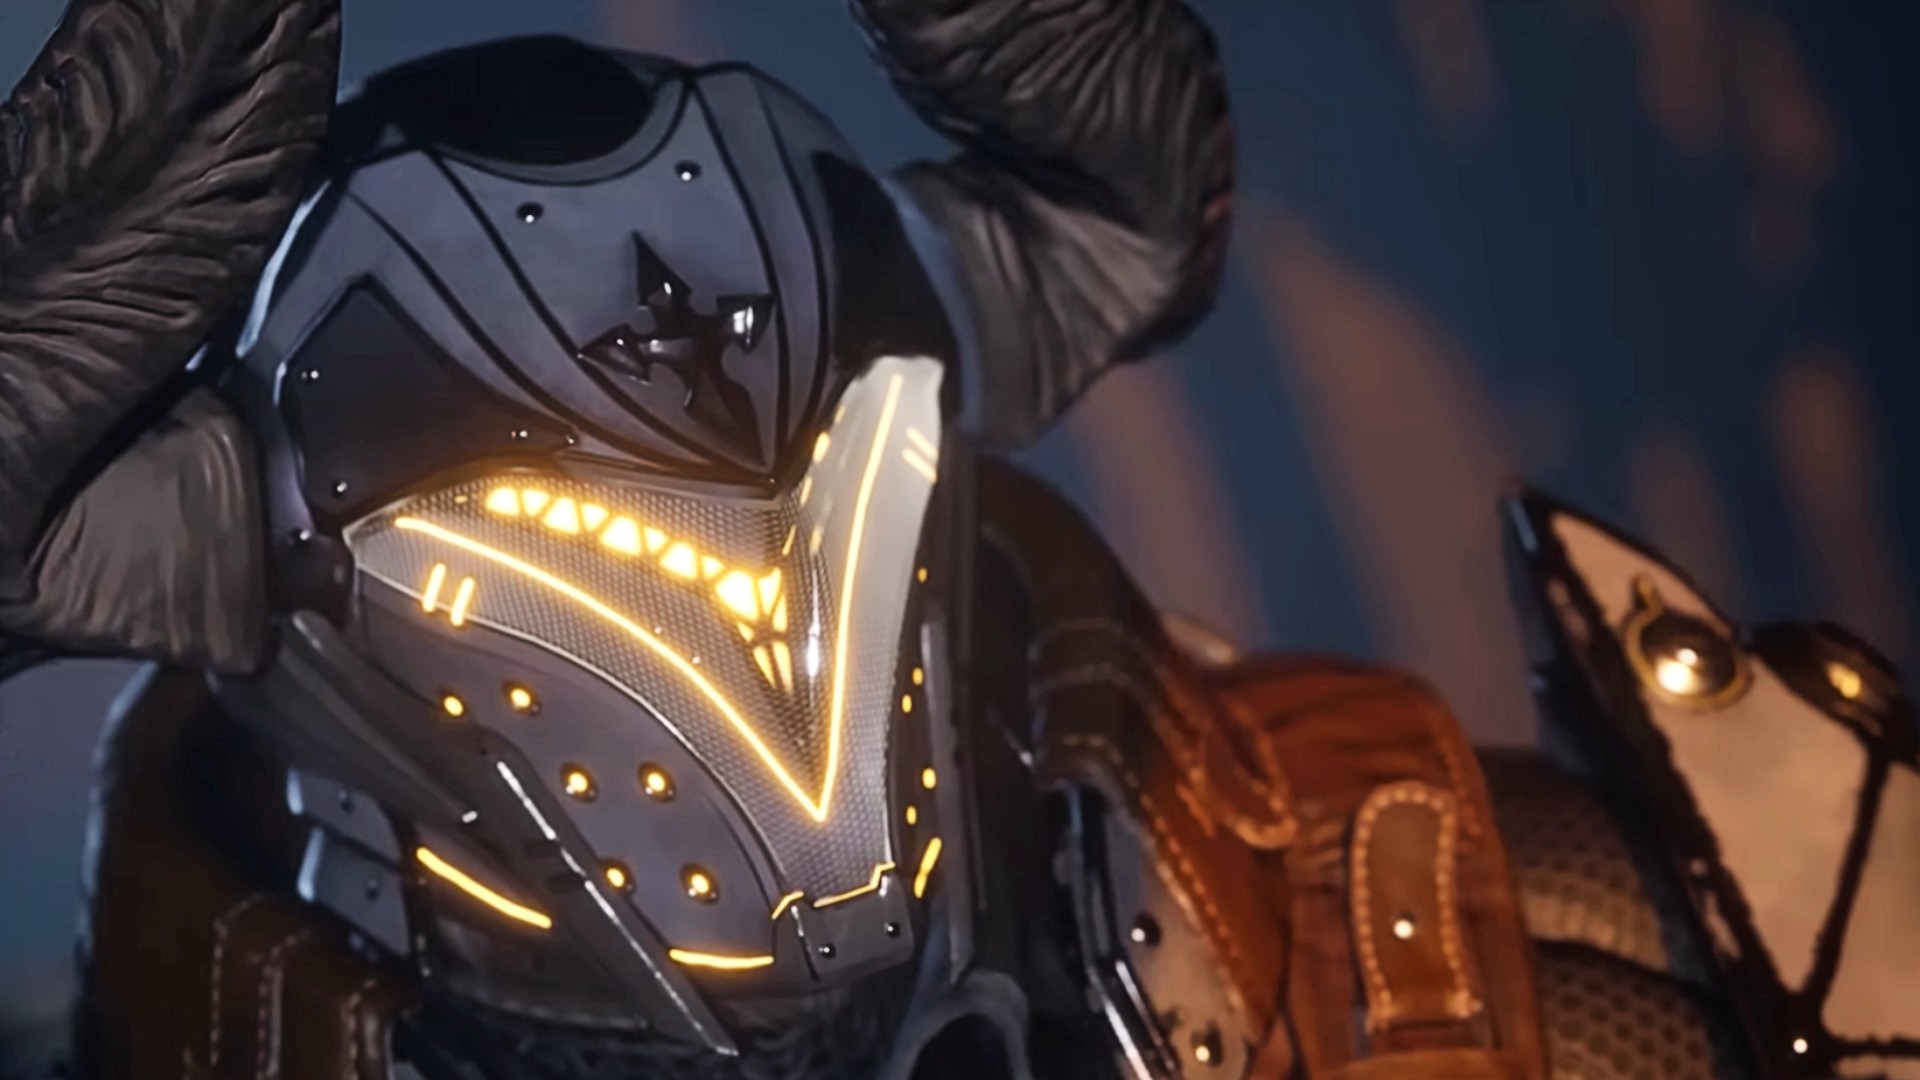 A playable character wearing a horned helmet looks into the distance in The First Descendant.